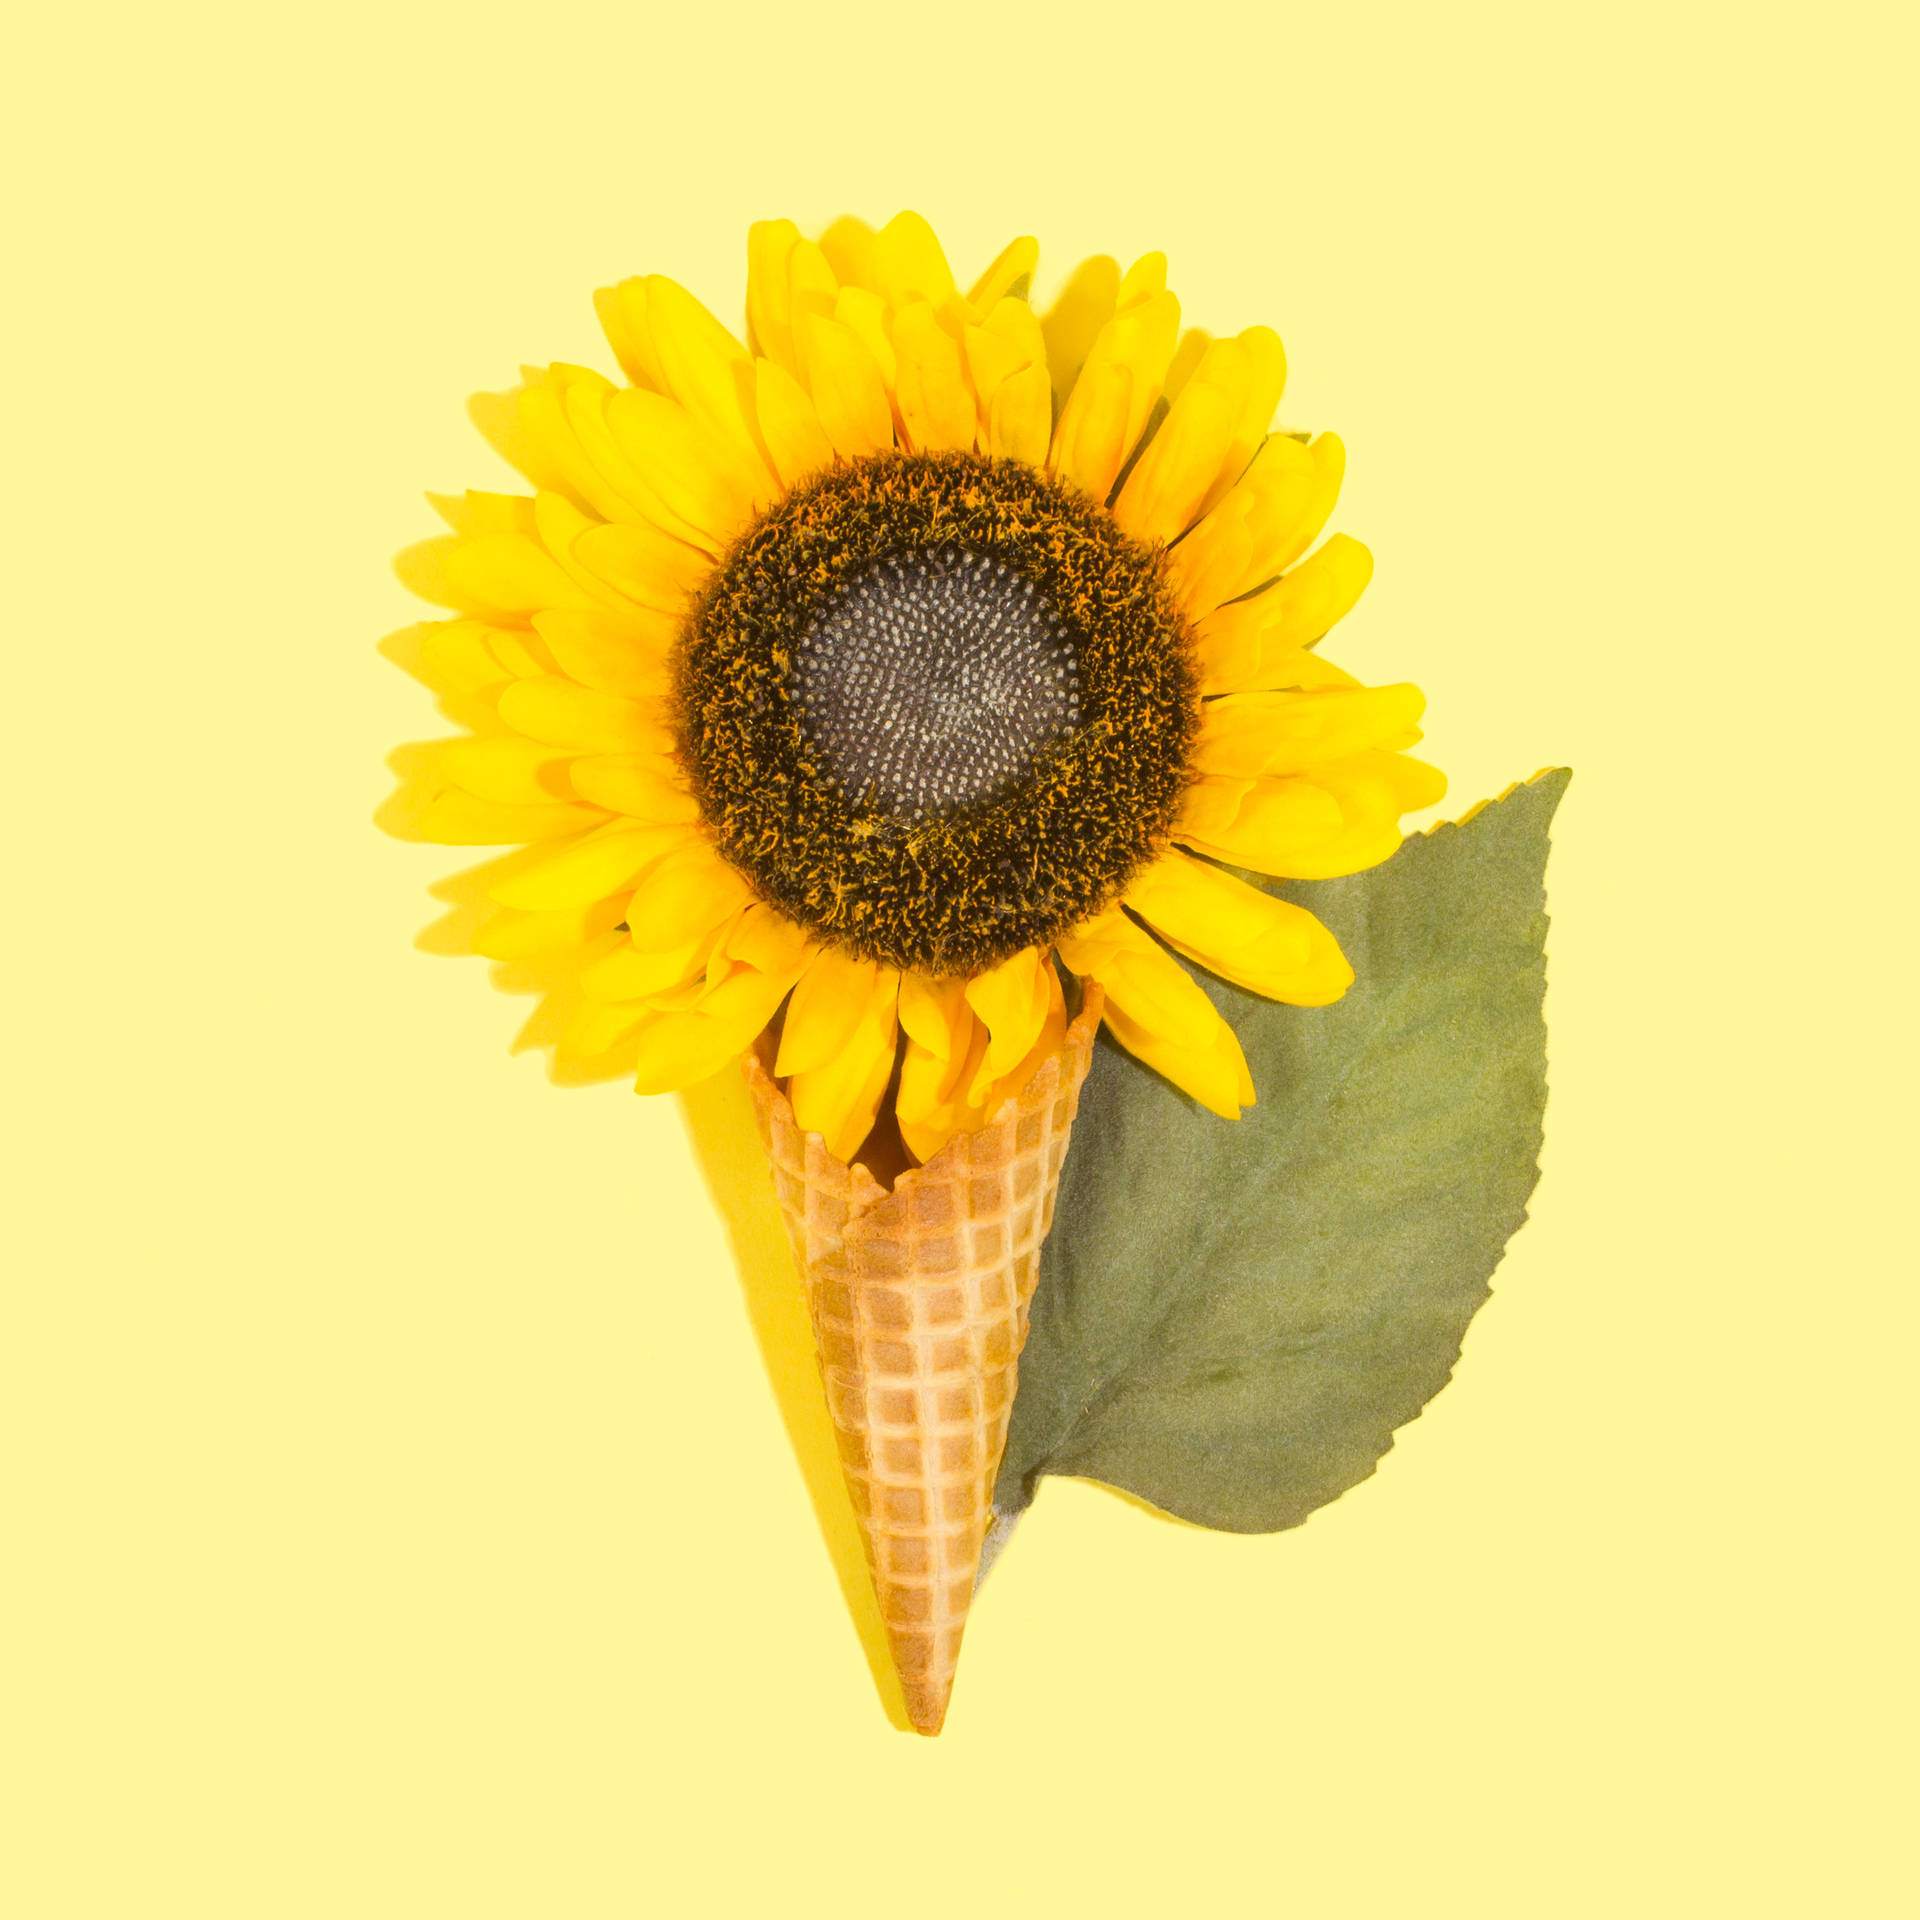 3135X3135 Sunflower Wallpaper and Background